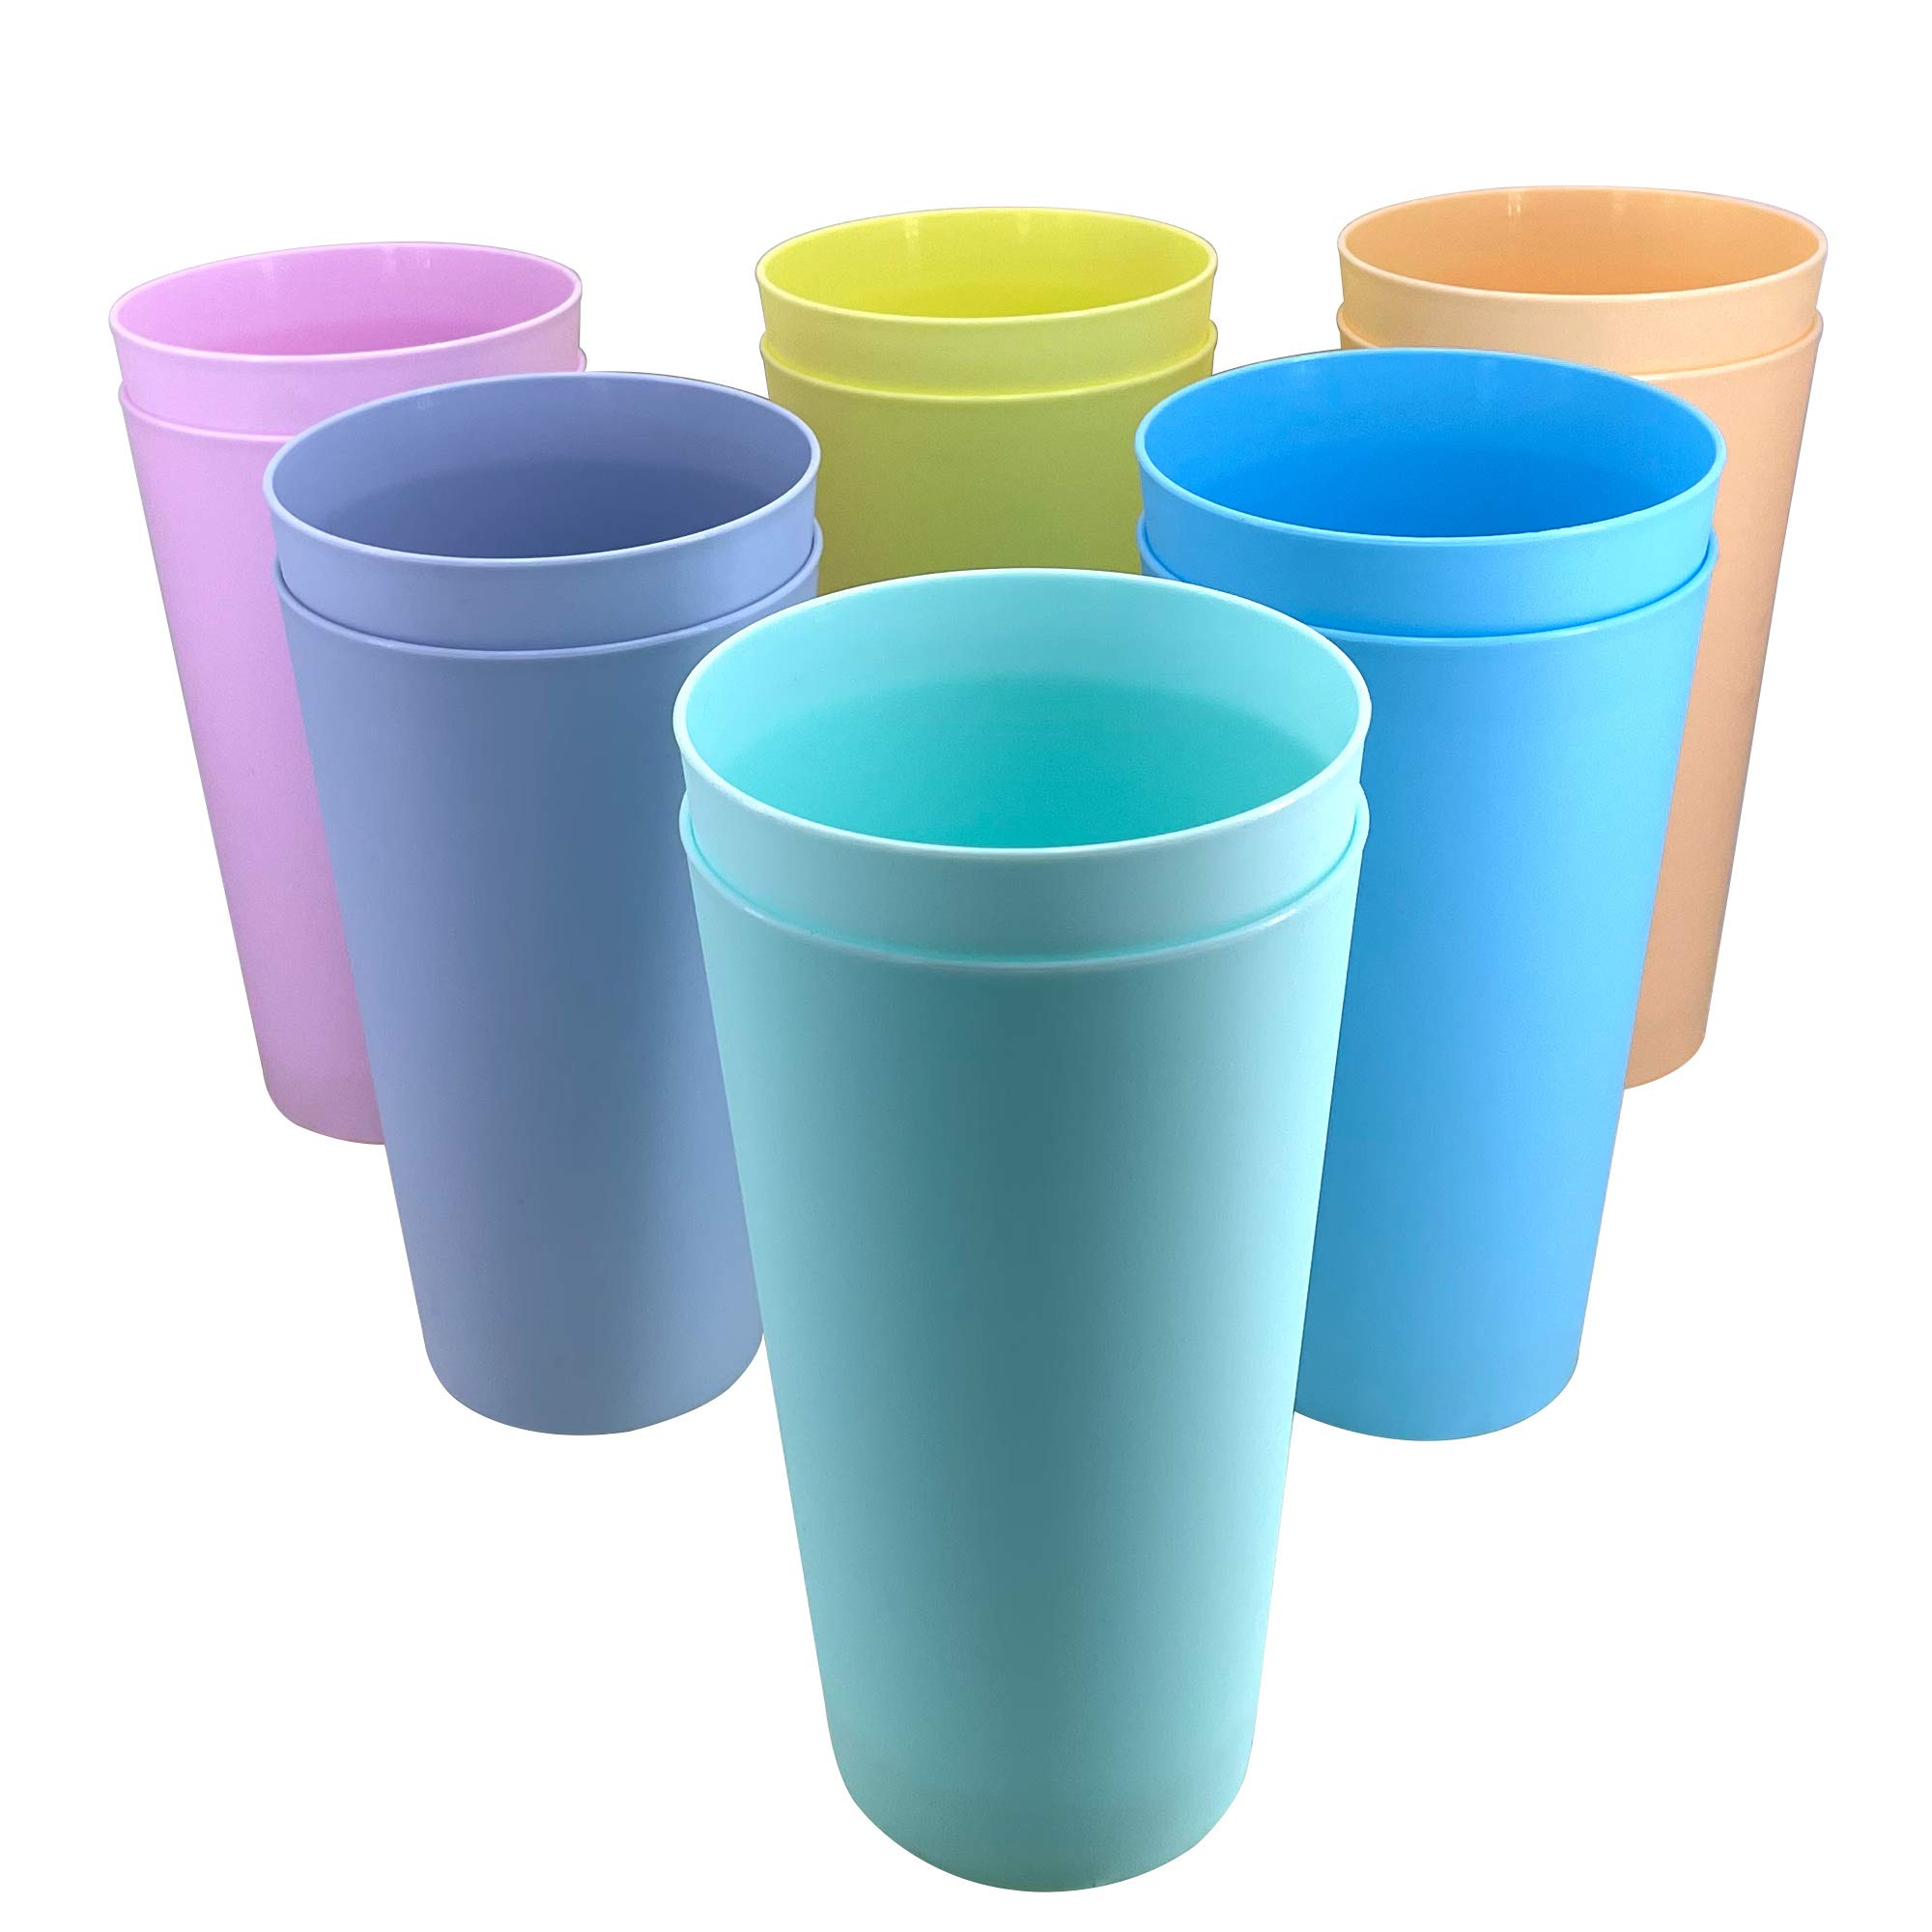 WEXINHAO 32-ounce Plastic Tumblers ,Large Drinking cups BPA